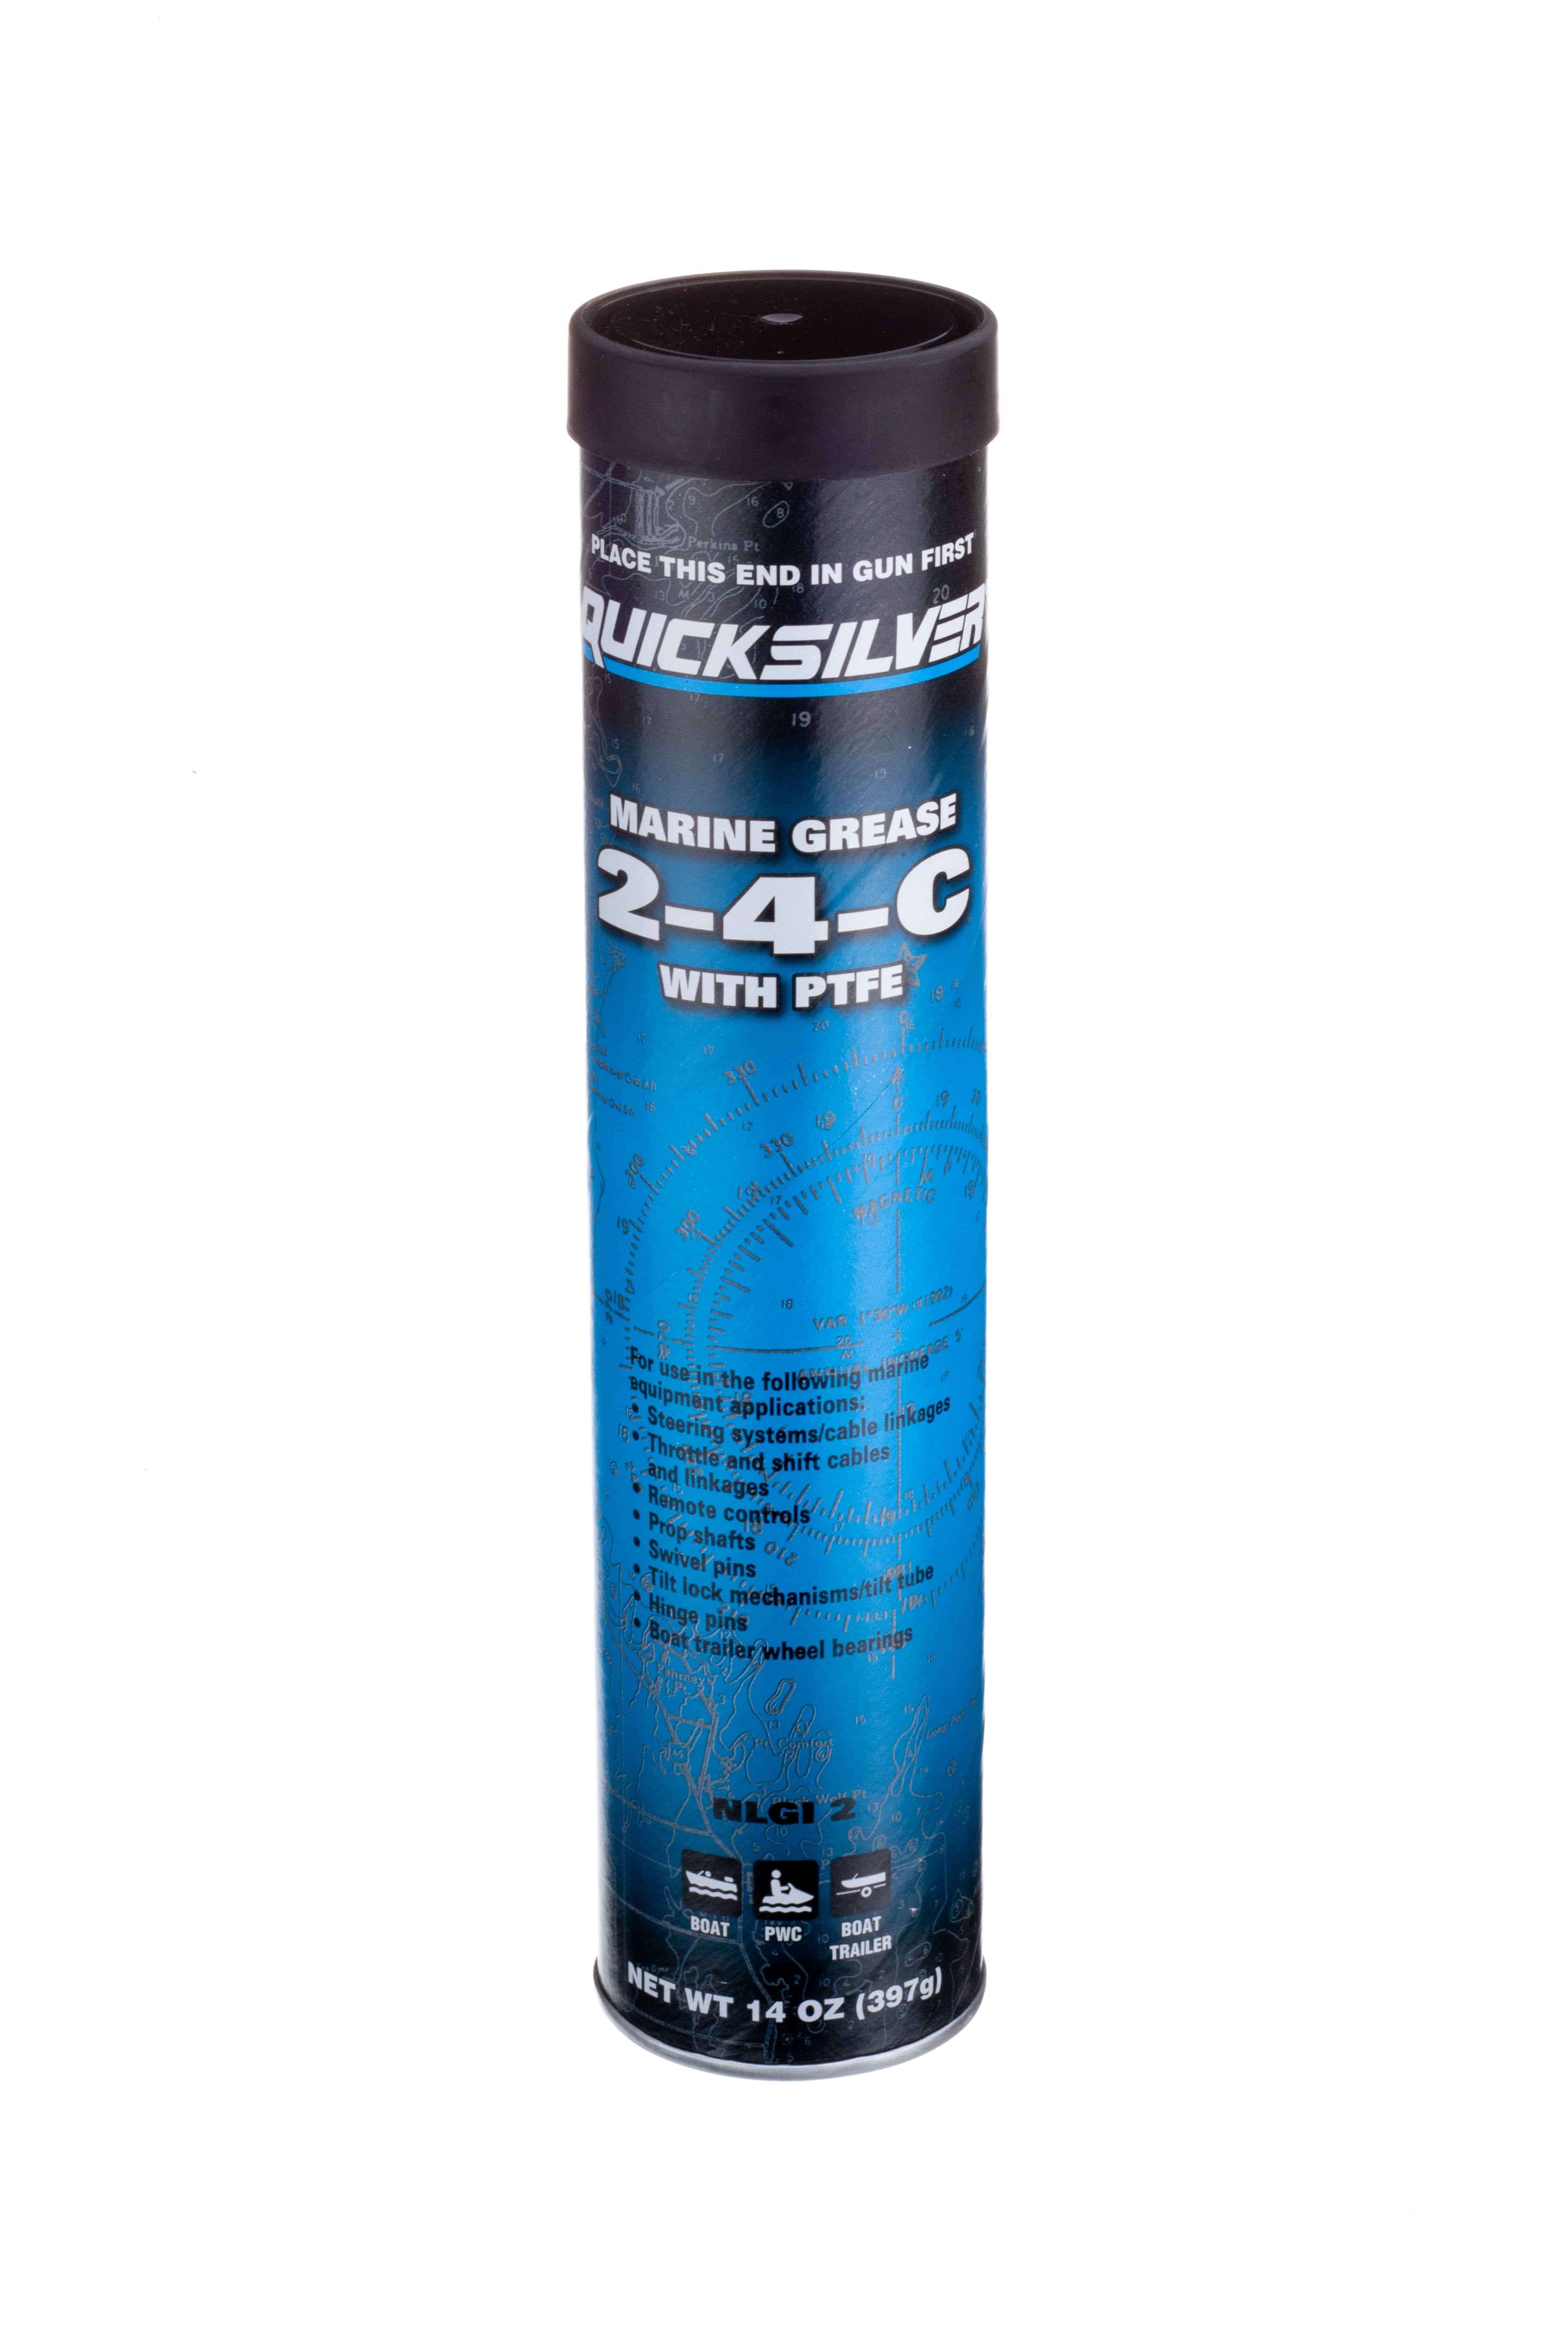 Quicksilver 802863Q1 2-4-C Marine Grease/Lubricant with PTFE, 14-Ounce  Cartridge